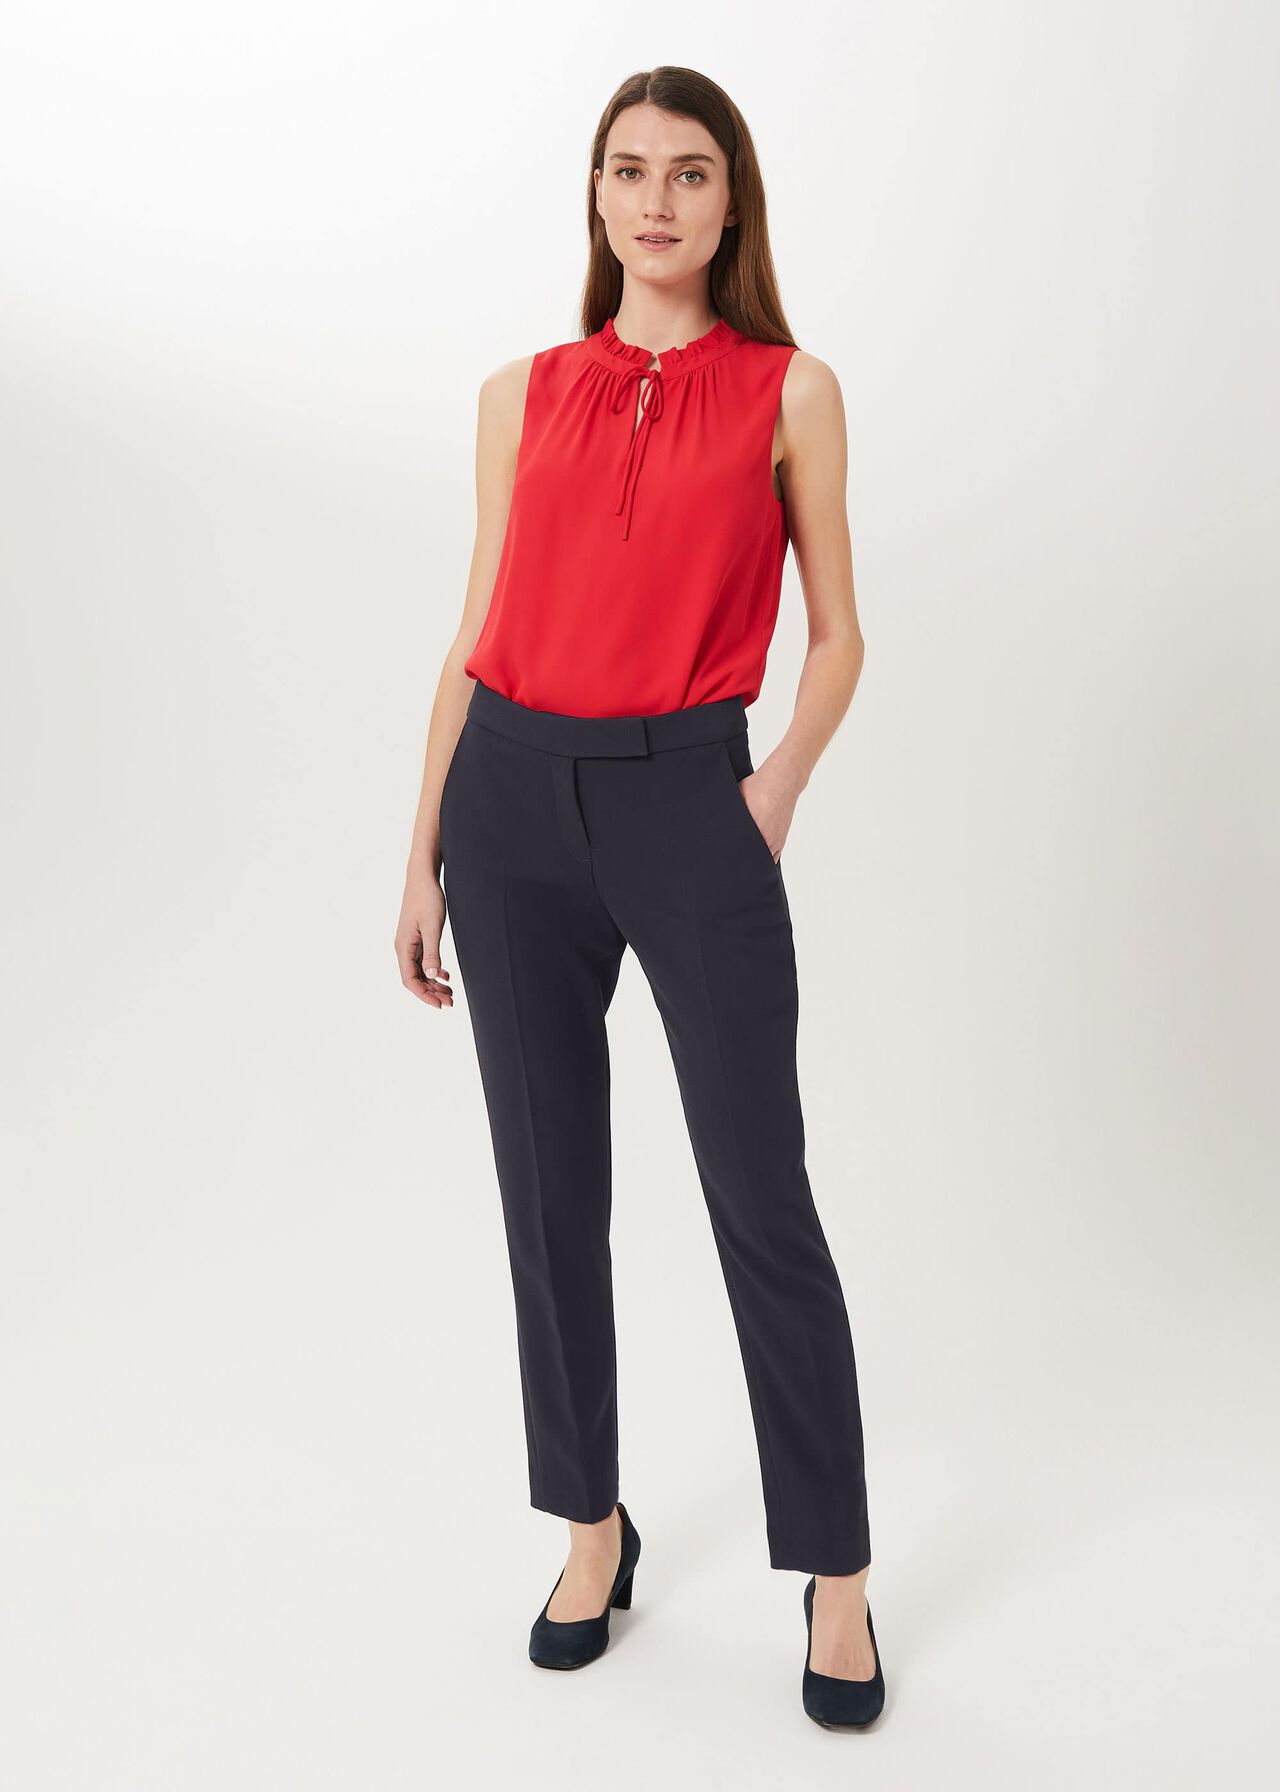 Leila Slim Pants With Stretch, Navy, hi-res